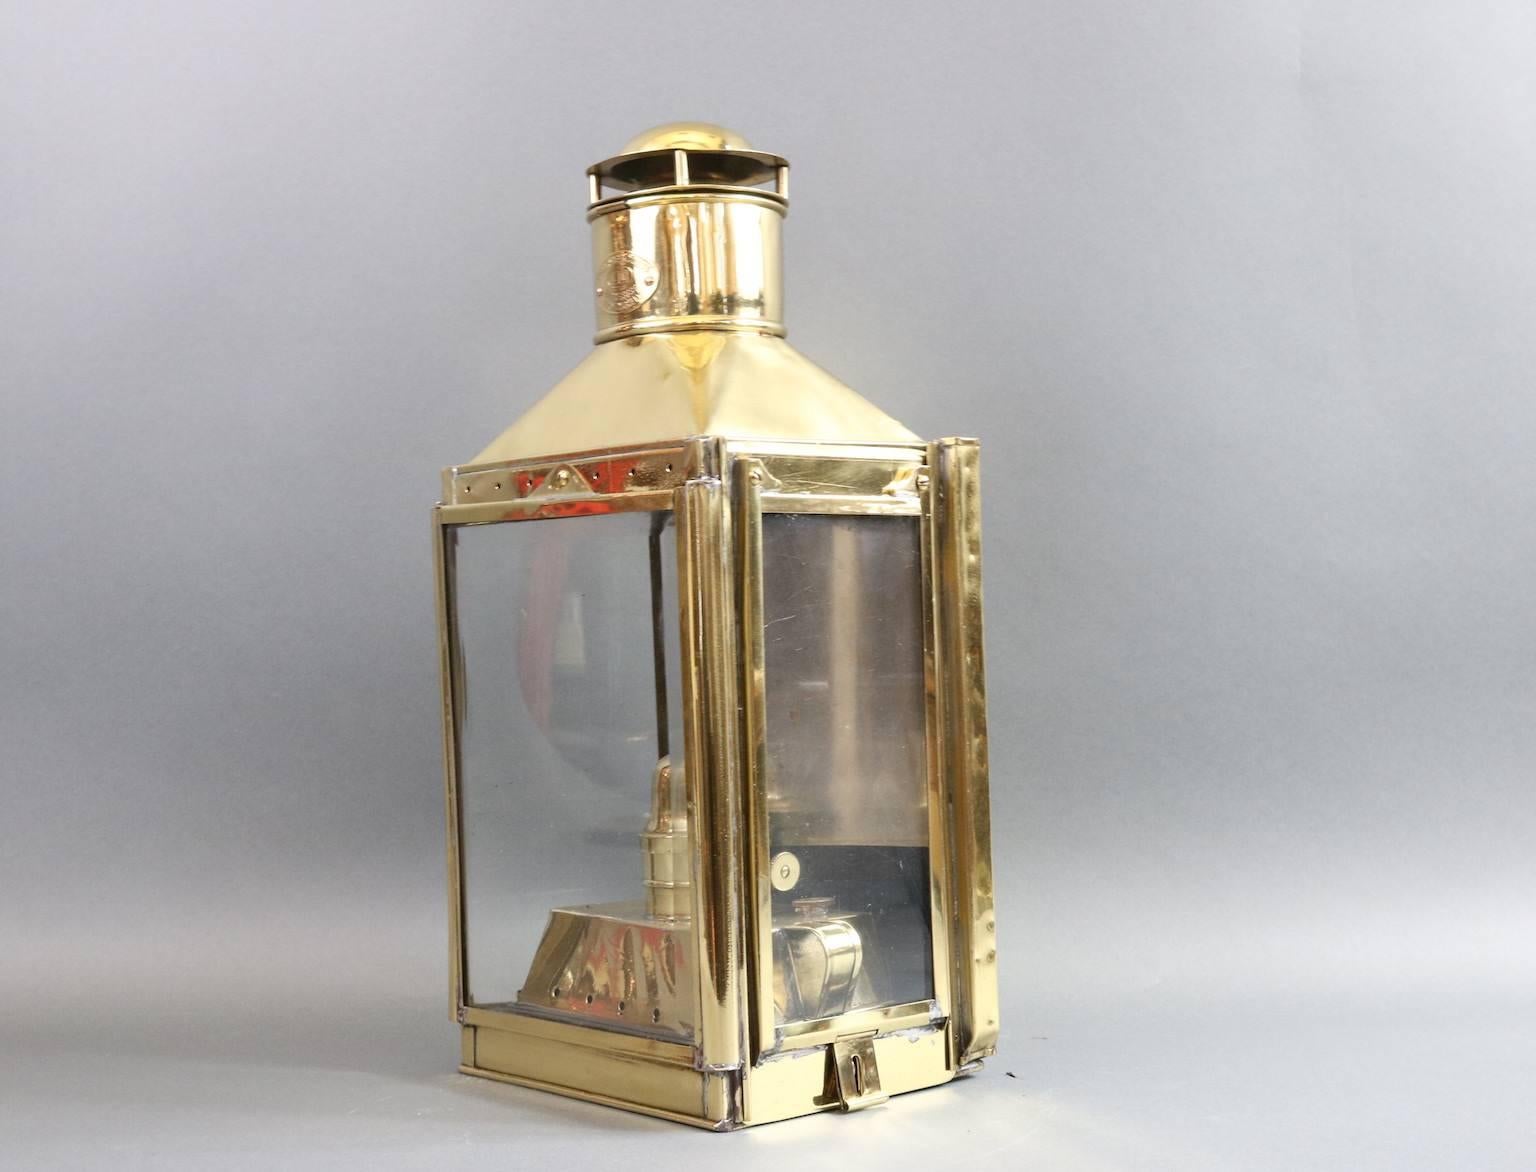 Solid brass ship or yacht cabin lantern by C. Harvie & Co. Limited, 117 Priest Street, Birmingham. With three glass panes, removable burner with tank and vented top. Dimensions: 9.5